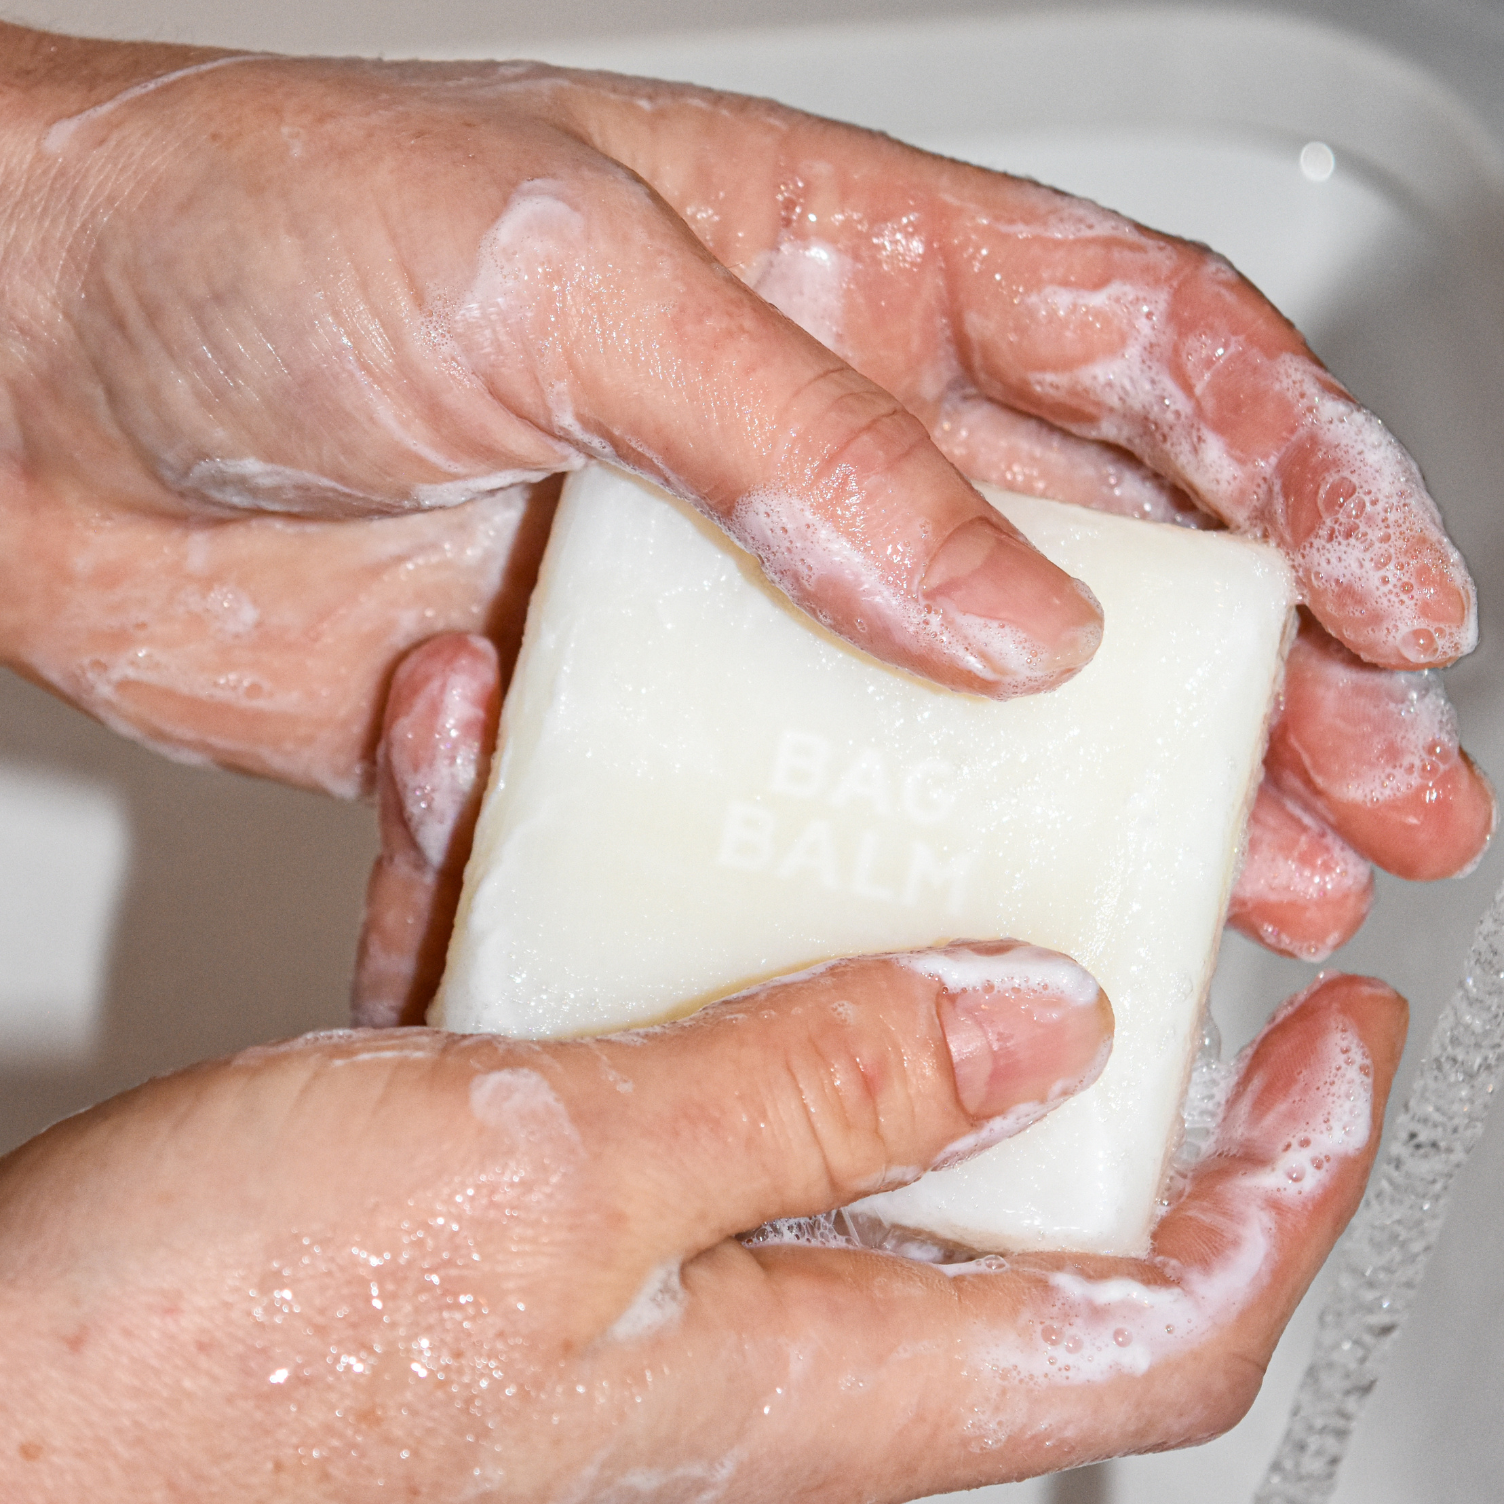 Hands holding sudsy soap